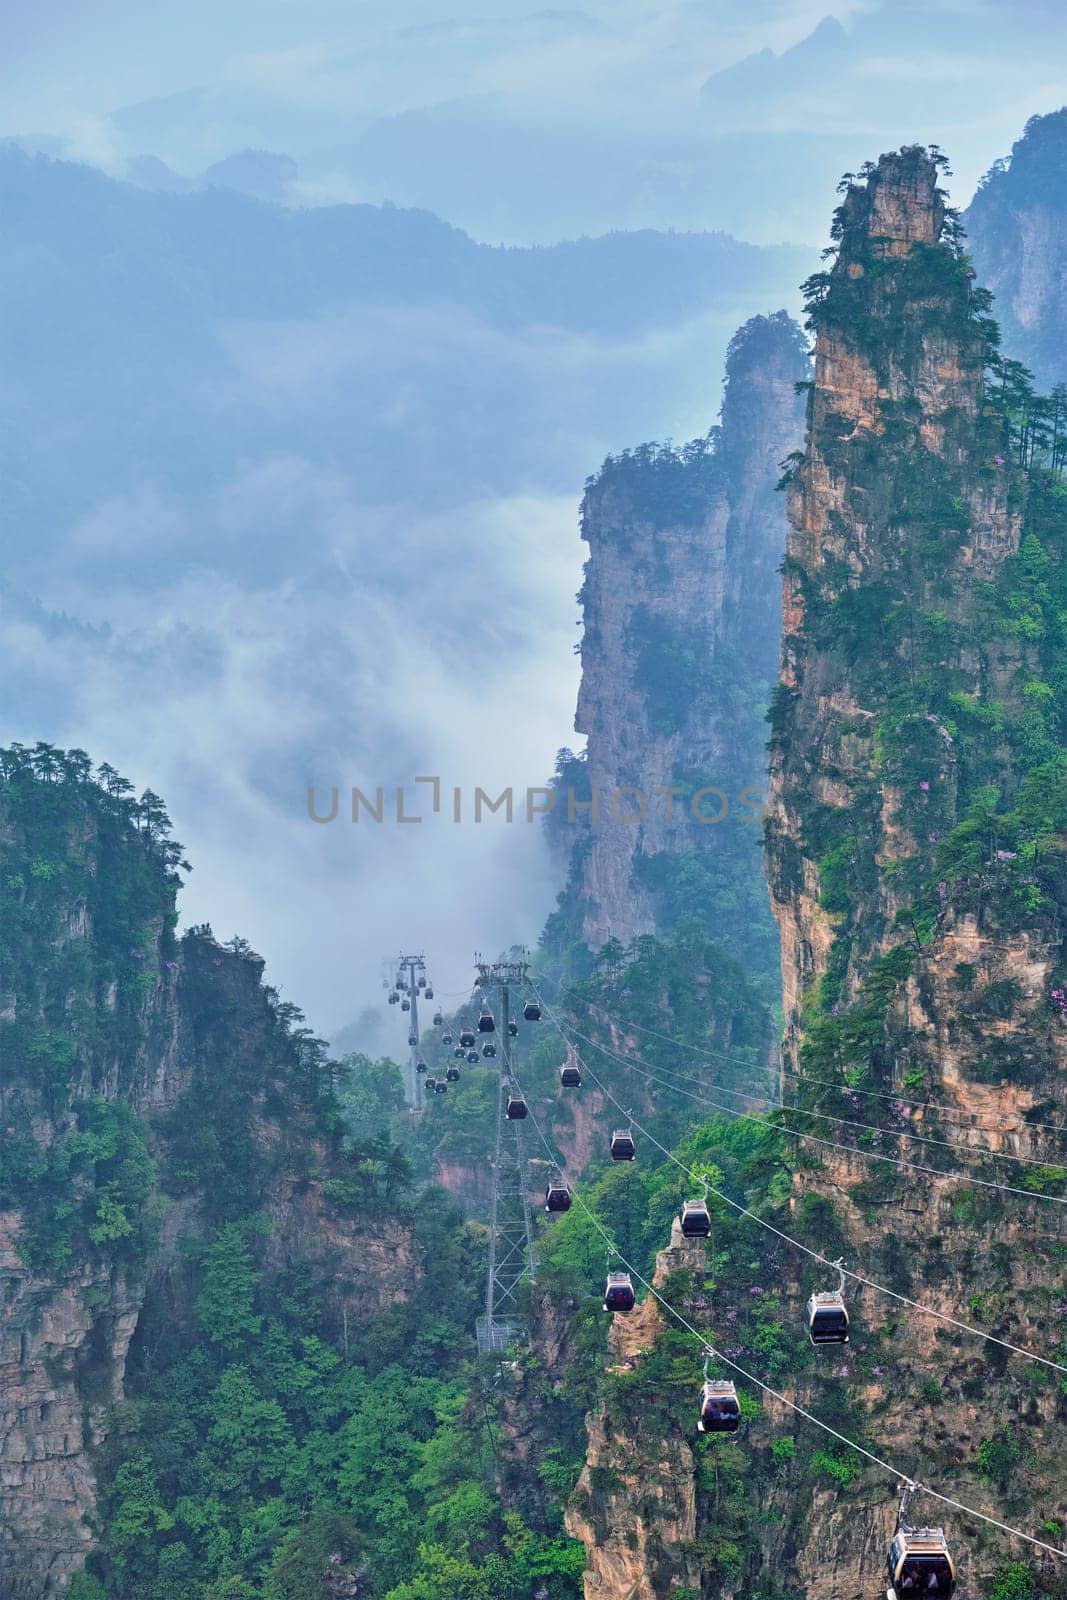 Famous tourist attraction of China - Zhangjiajie stone pillars cliff mountains in fog clouds with cable railway car lift at Wulingyuan, Hunan, China. With camera pan